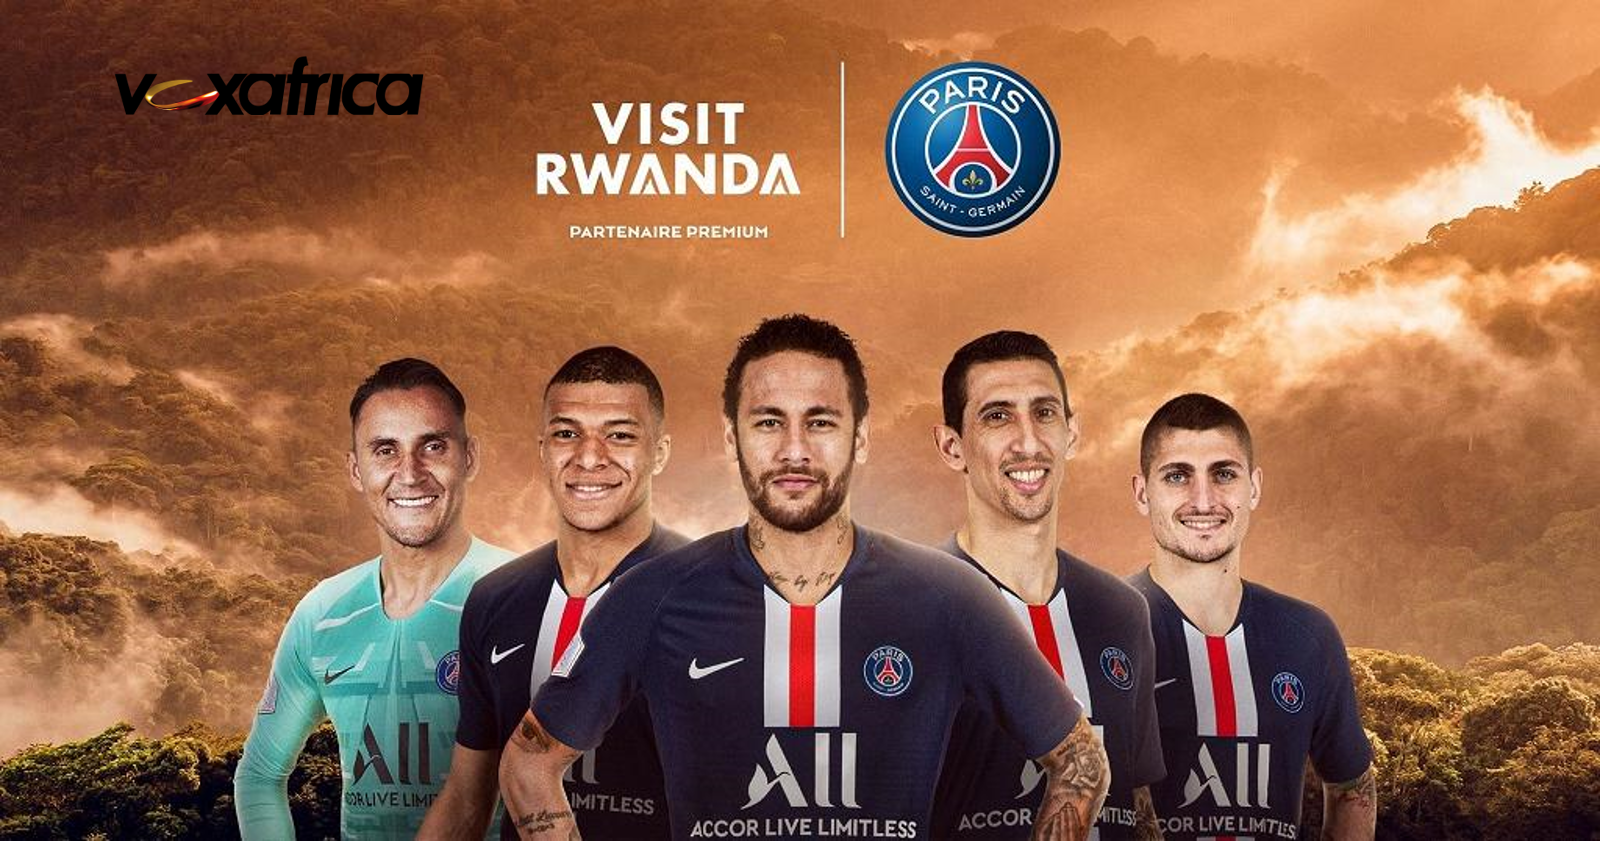 RWANDA SIGNS DEAL WITH PARIS ST GERMAIN TO PROMOTE TOURISM